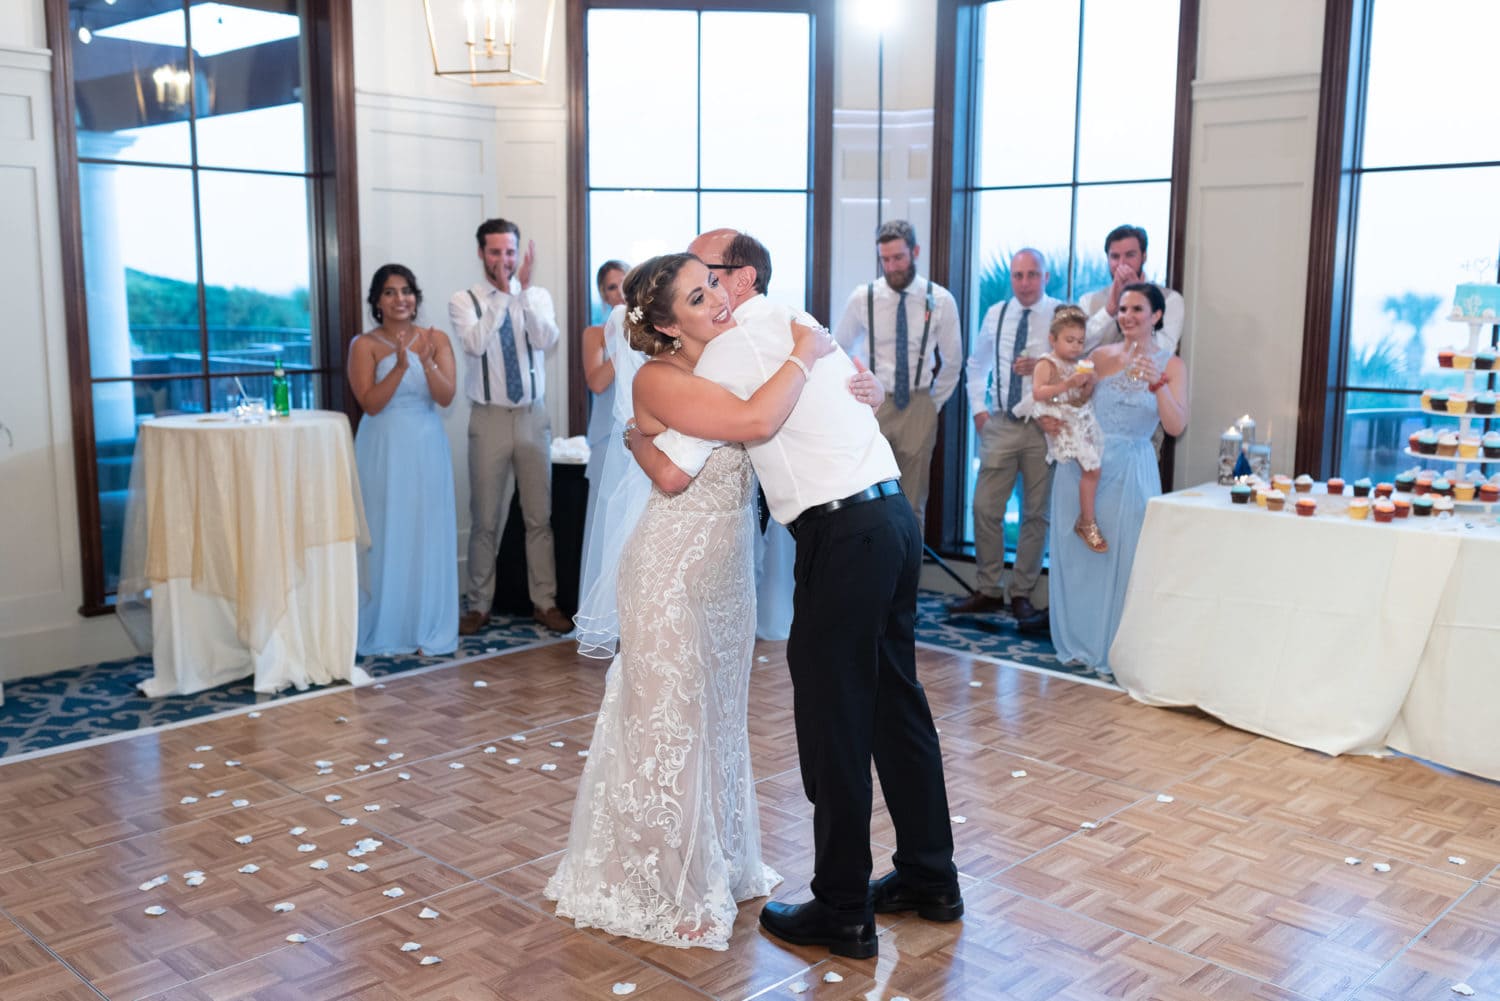 Choreographed first dance with bride and father Grande Dunes Ocean Club - Myrtle Beach